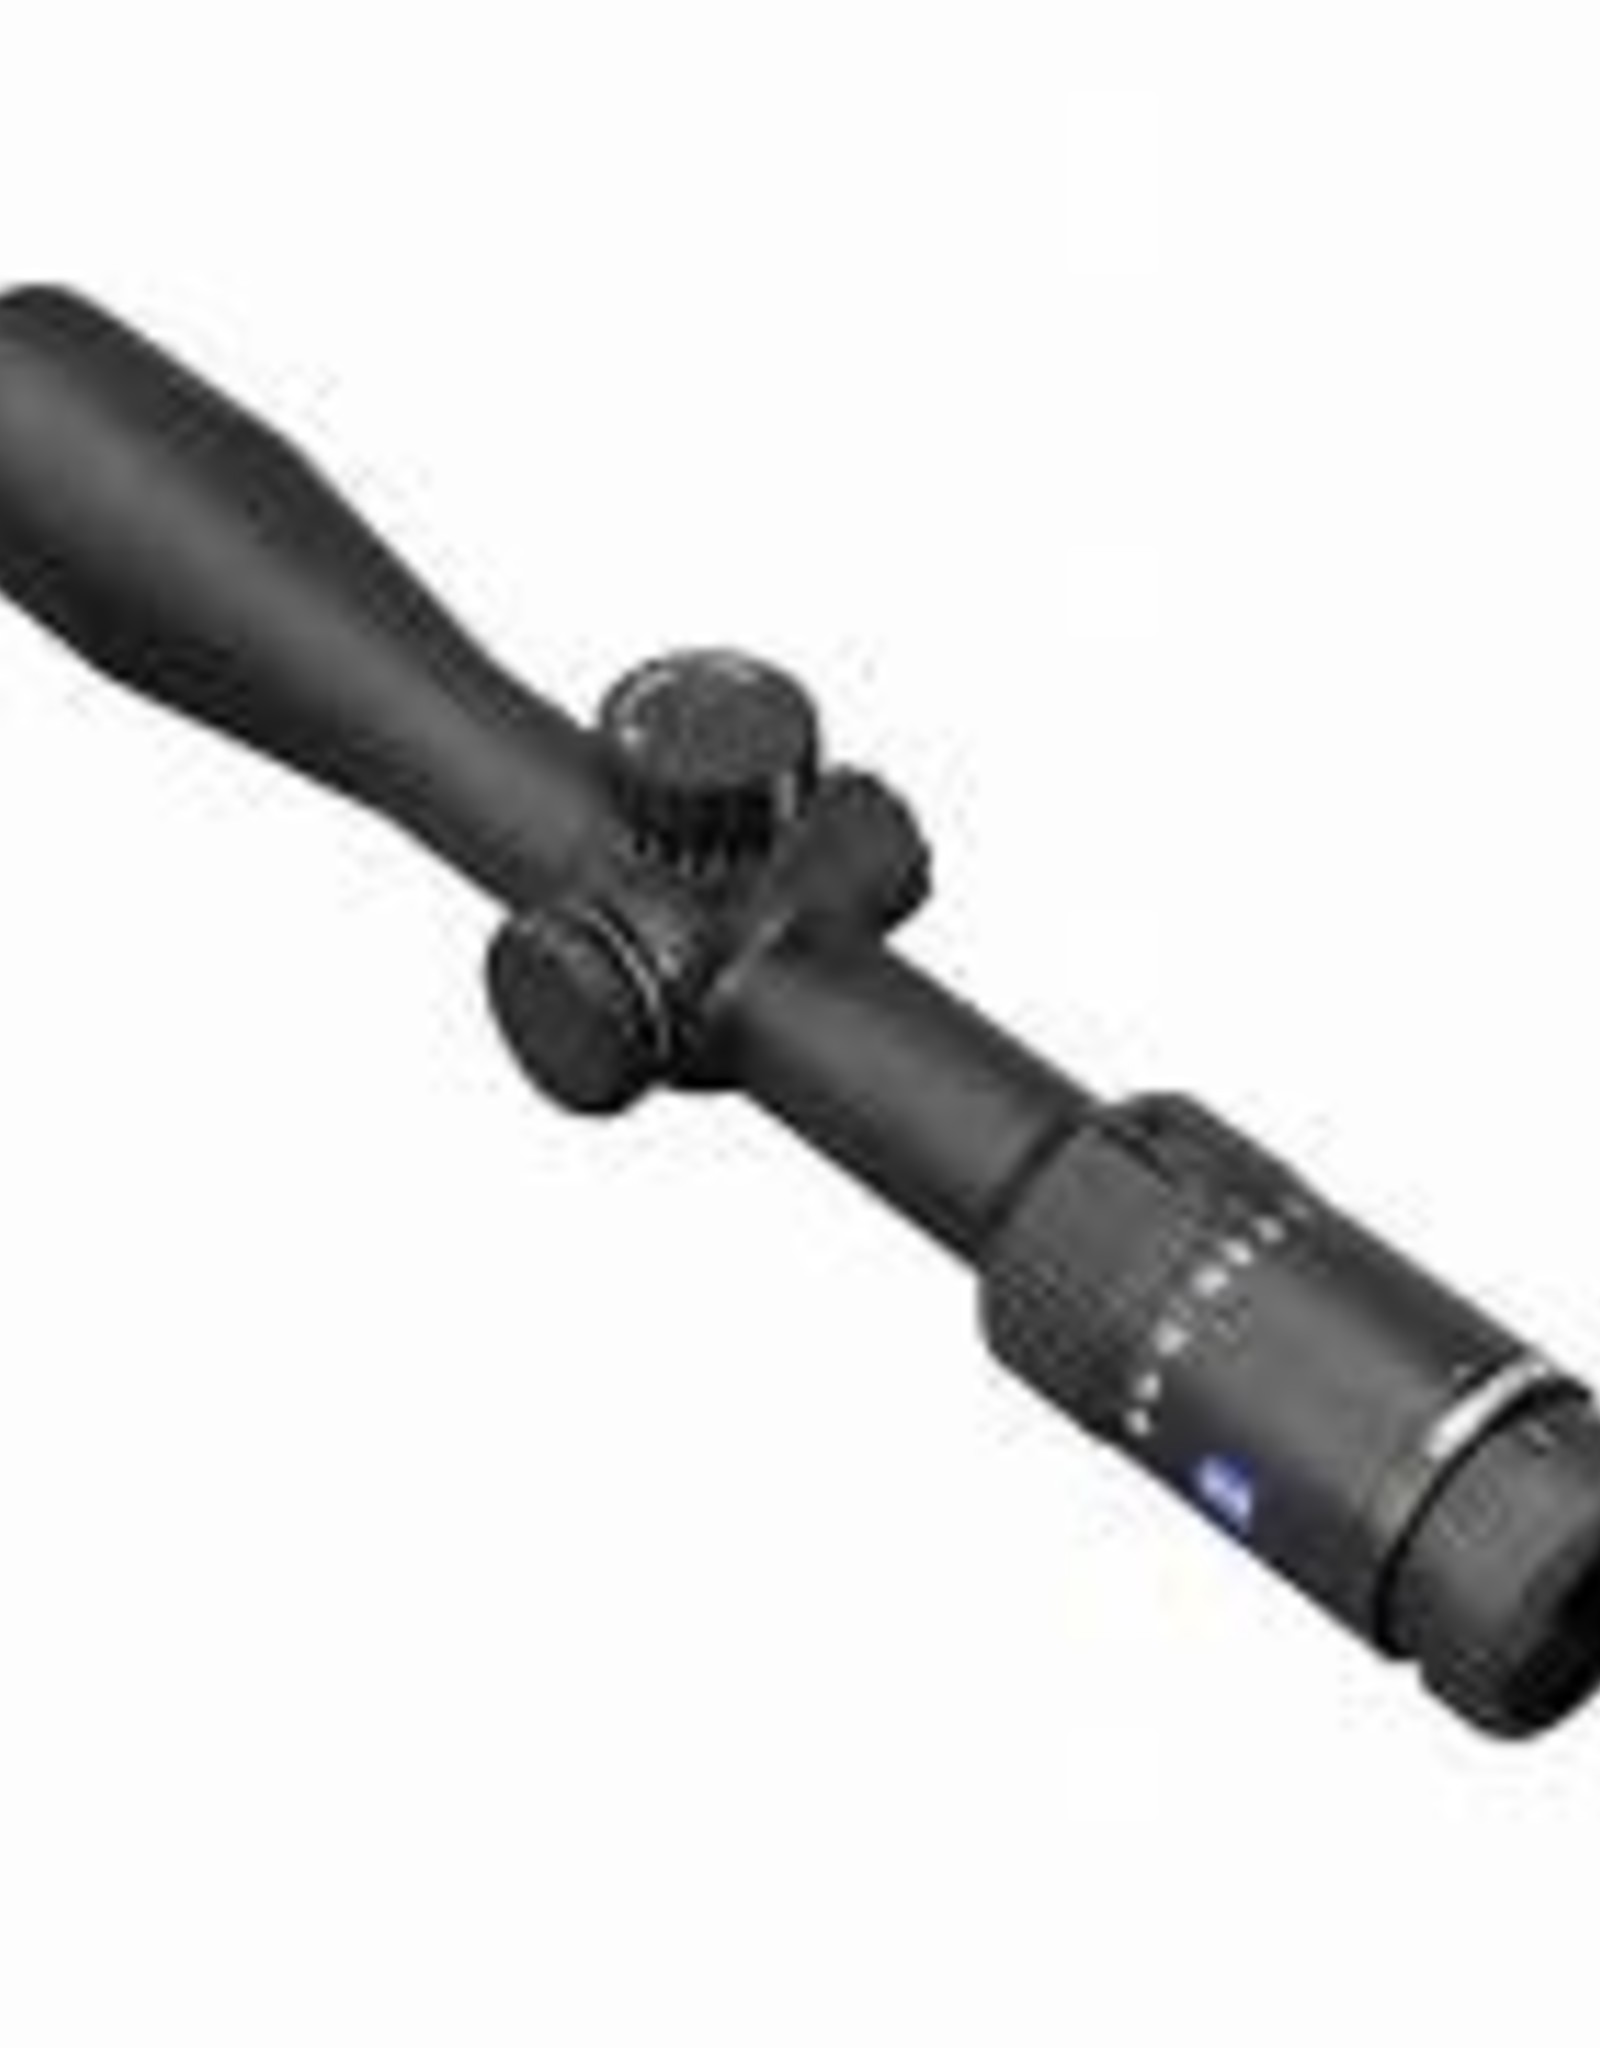 Zeiss Conquest V4 4-16x50 Reticle #68 Illuminated